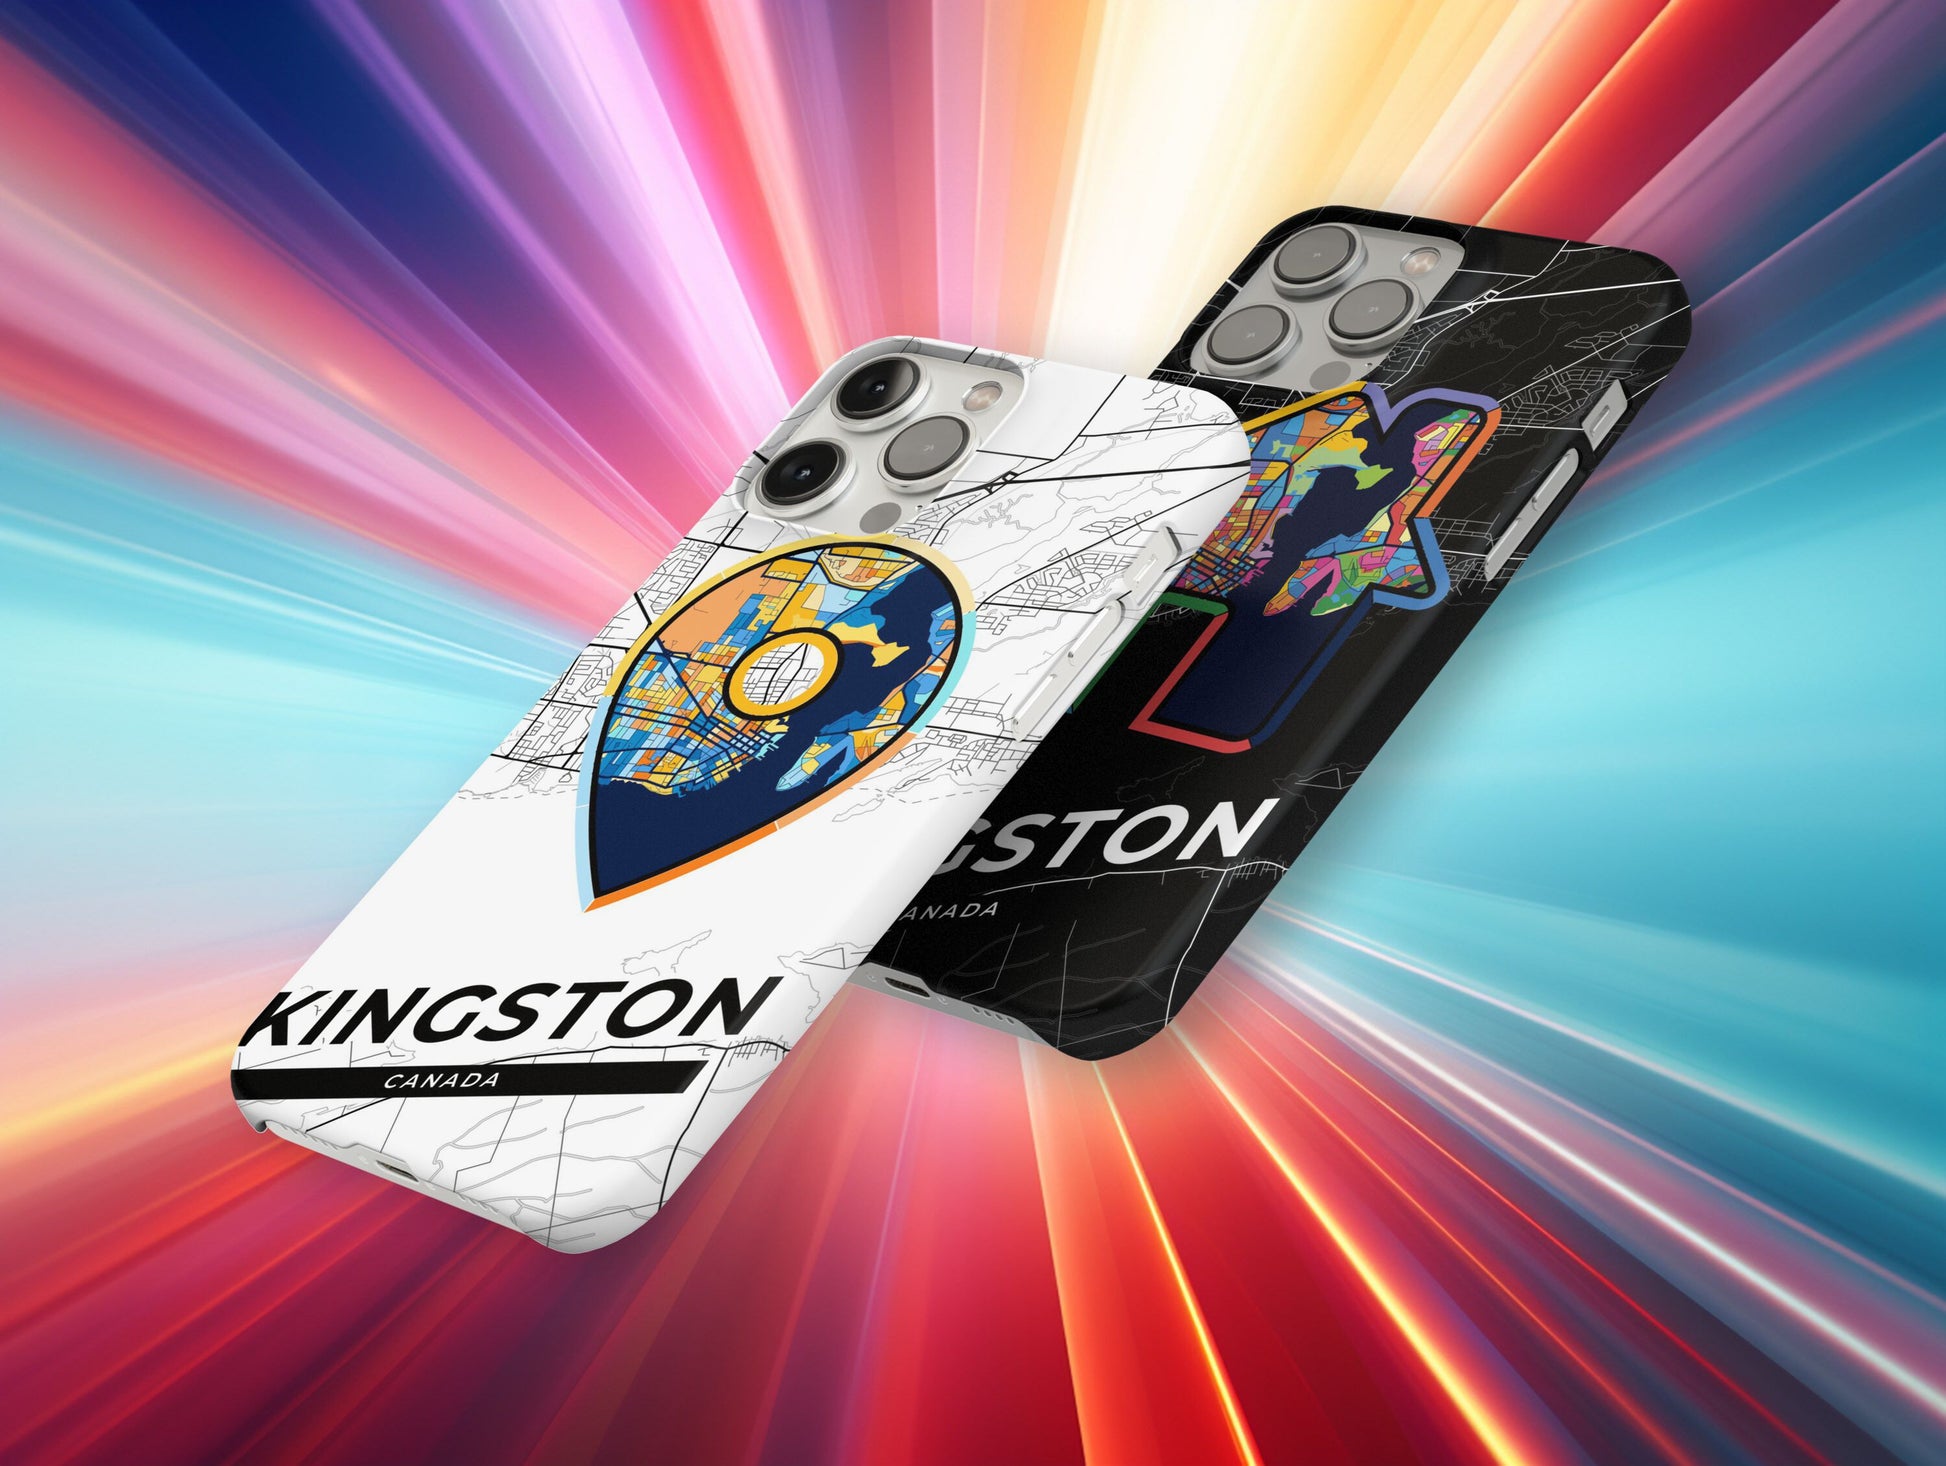 Kingston Canada slim phone case with colorful icon. Birthday, wedding or housewarming gift. Couple match cases.